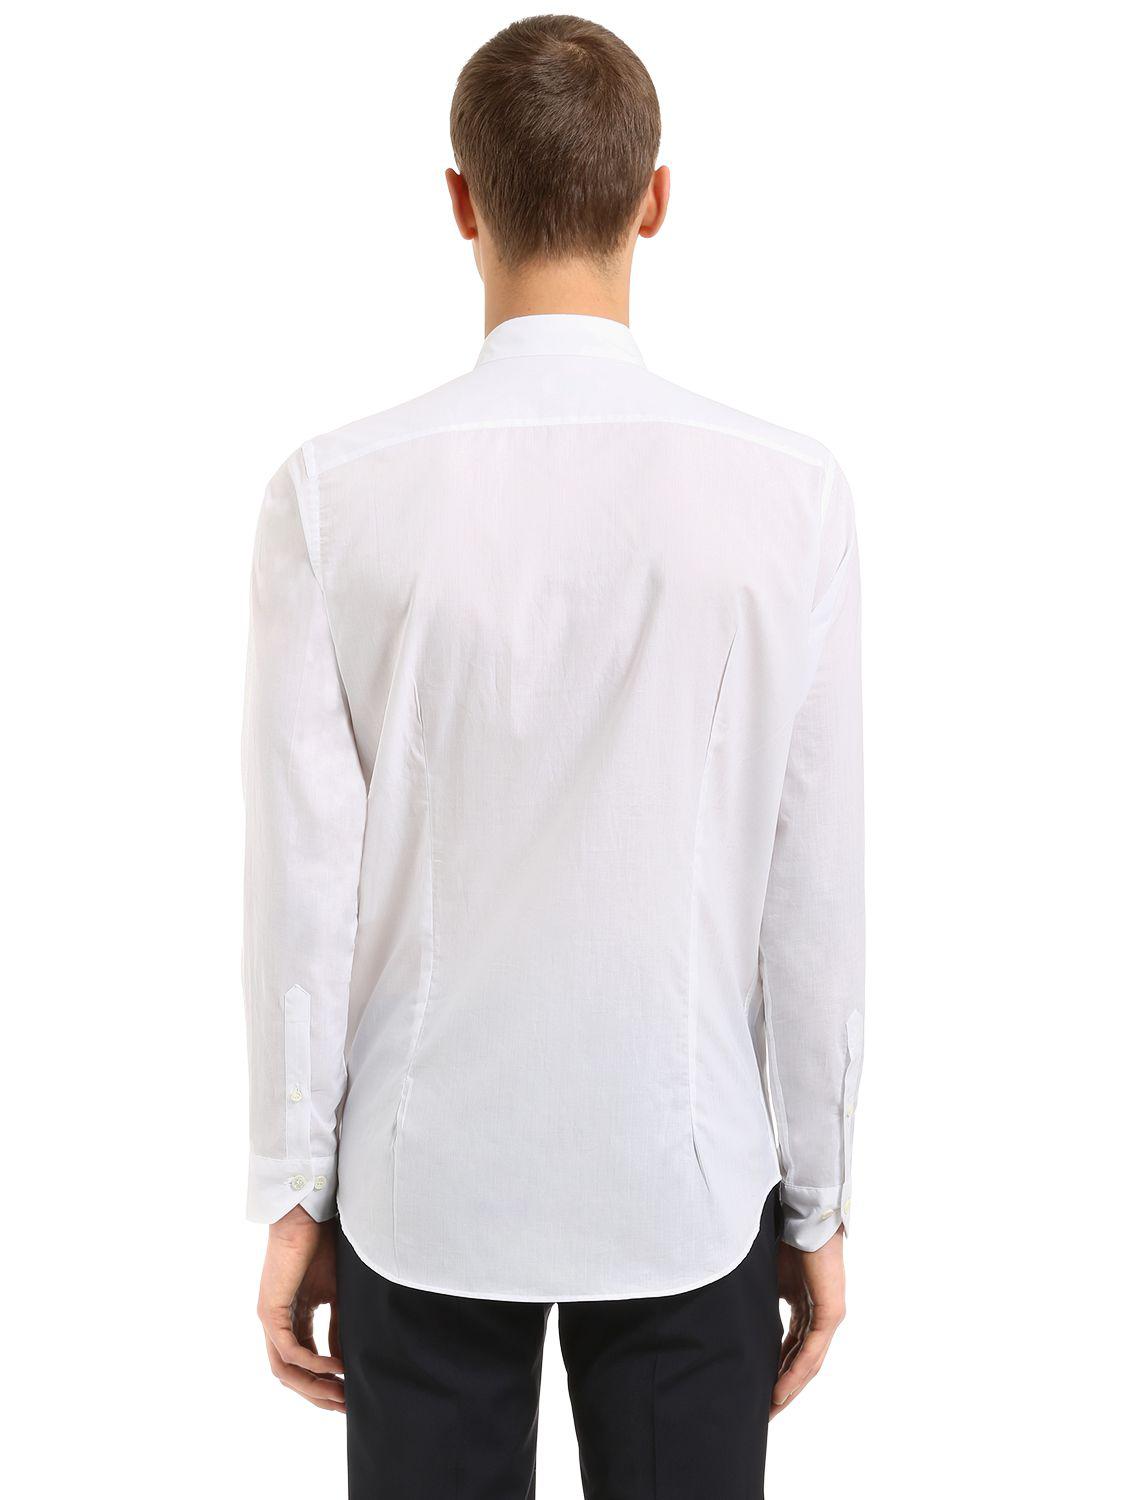 Etro Printed & Studded Cotton Muslin Shirt in White for Men - Lyst